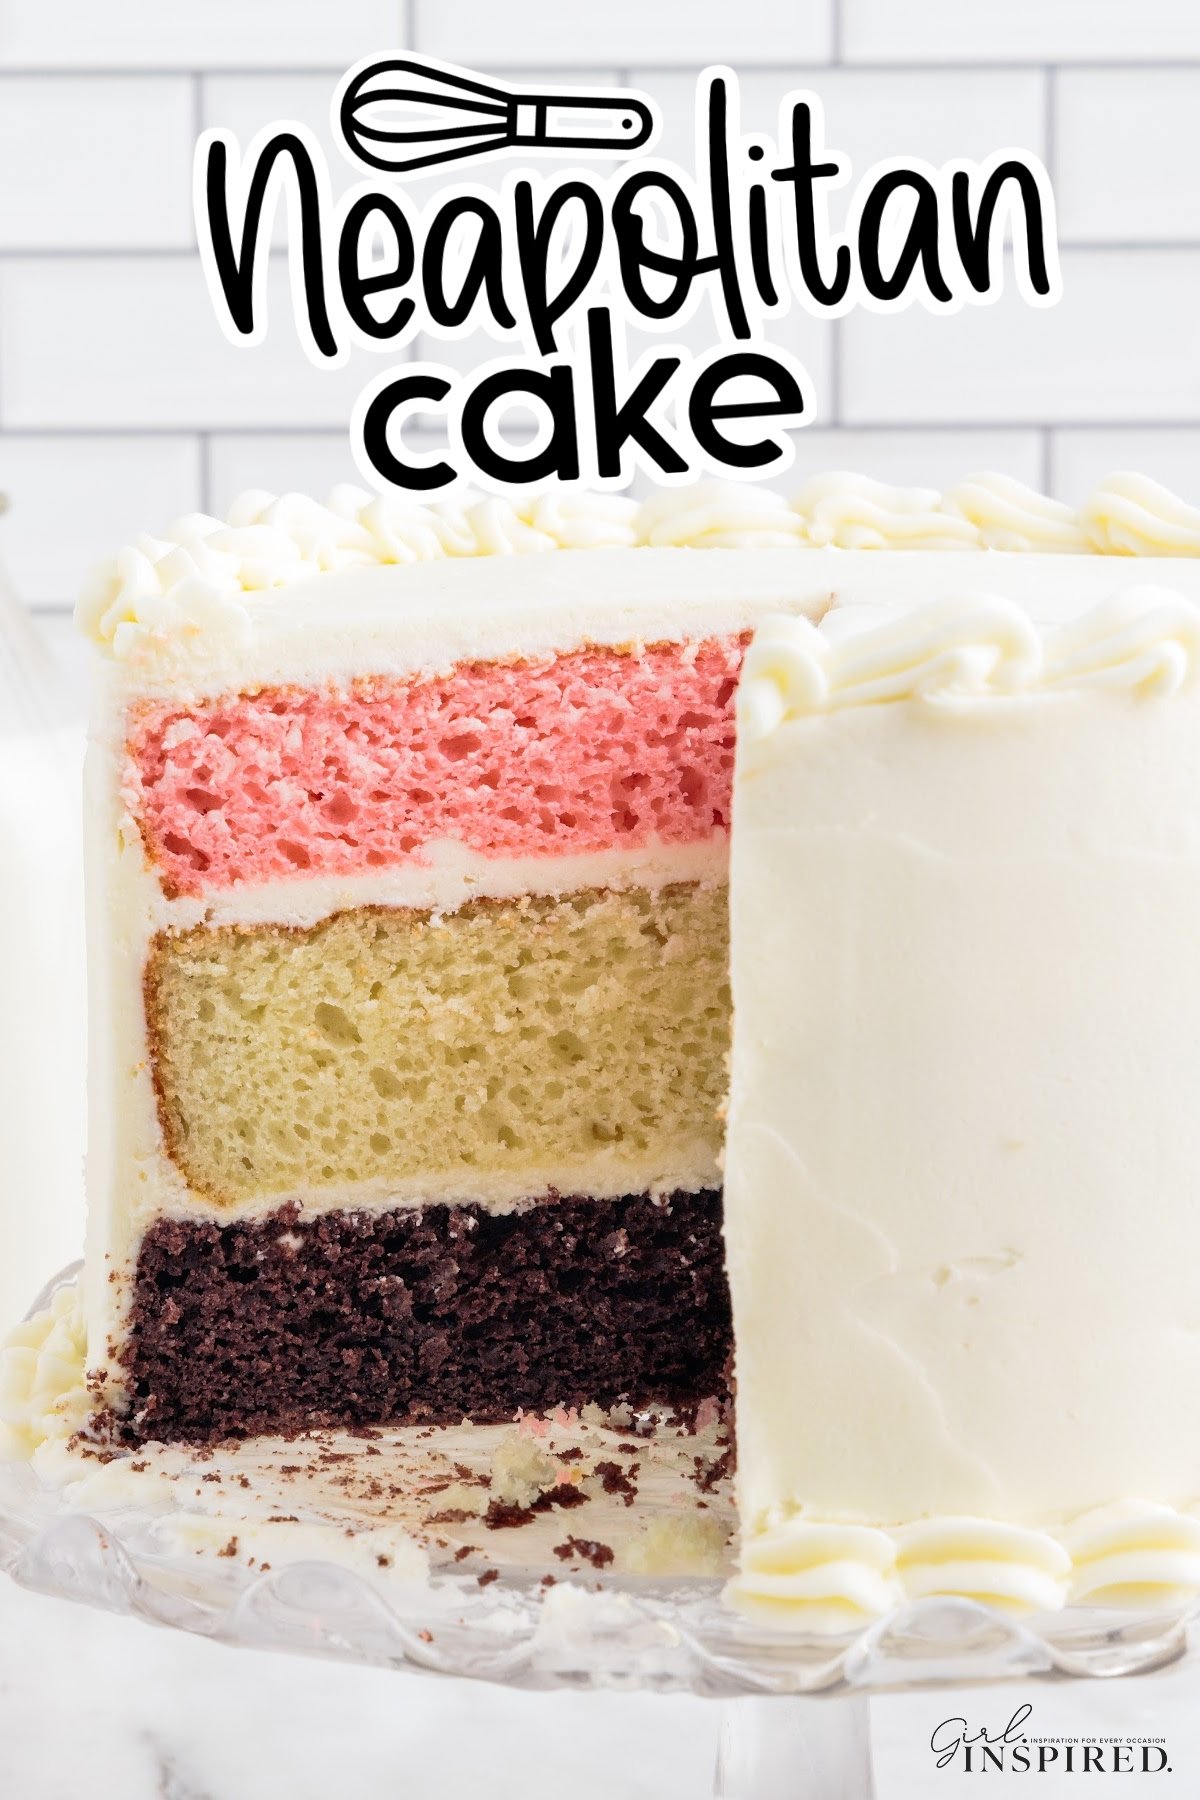 Neapolitan Cake frosted with white frosting, sliced open showing the layers.